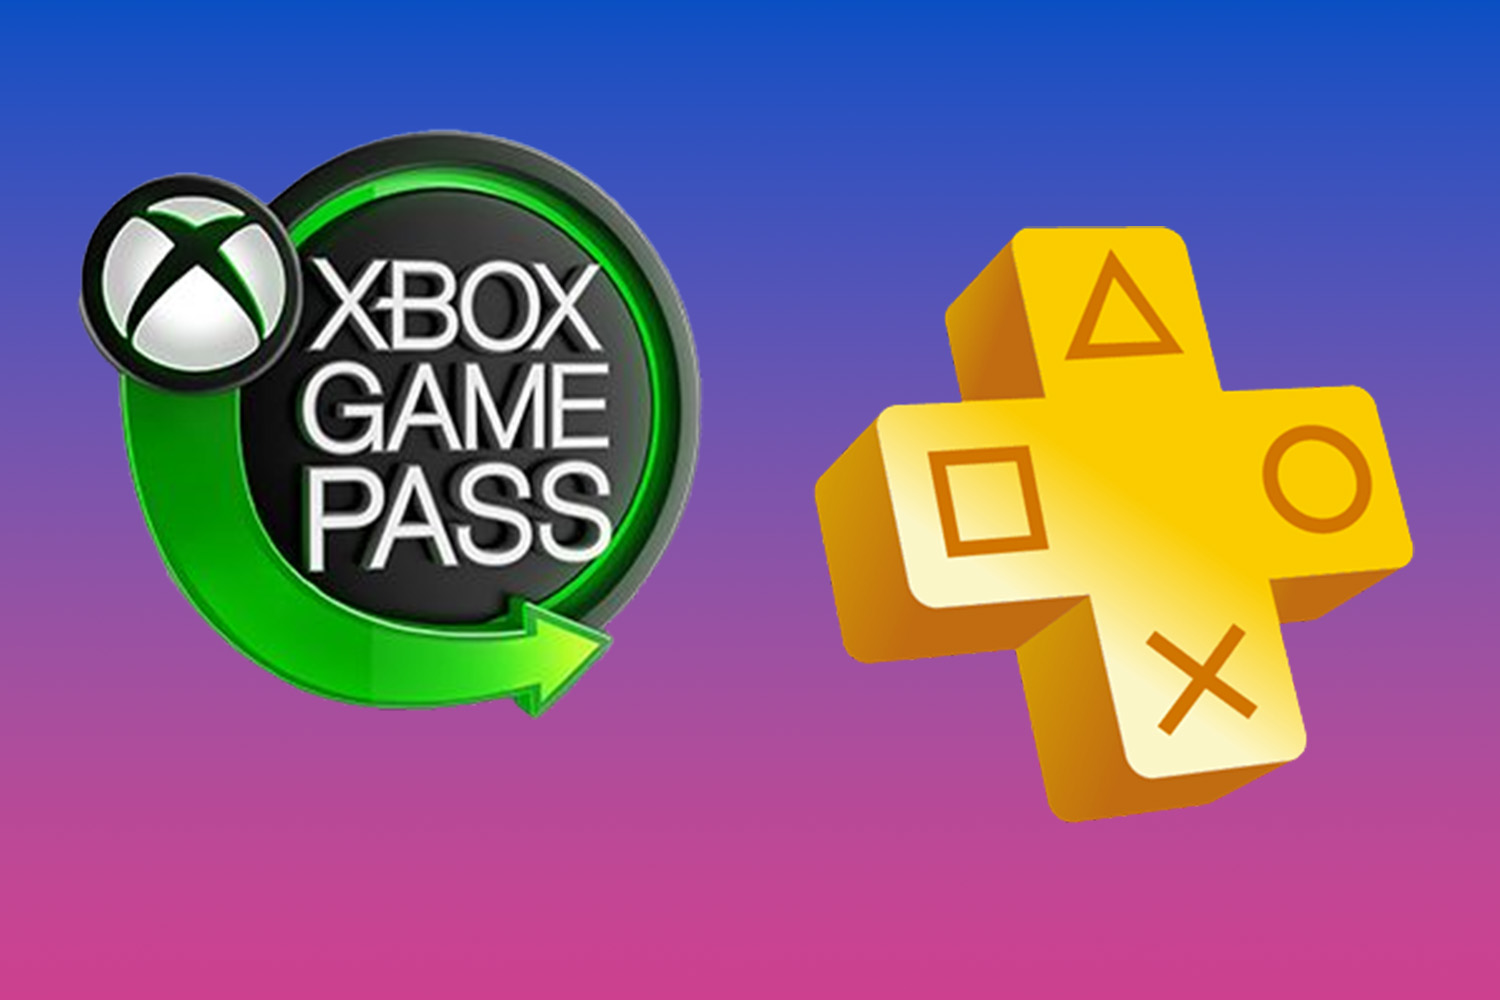 PlayStation Studios is bringing a game to Xbox Game Pass